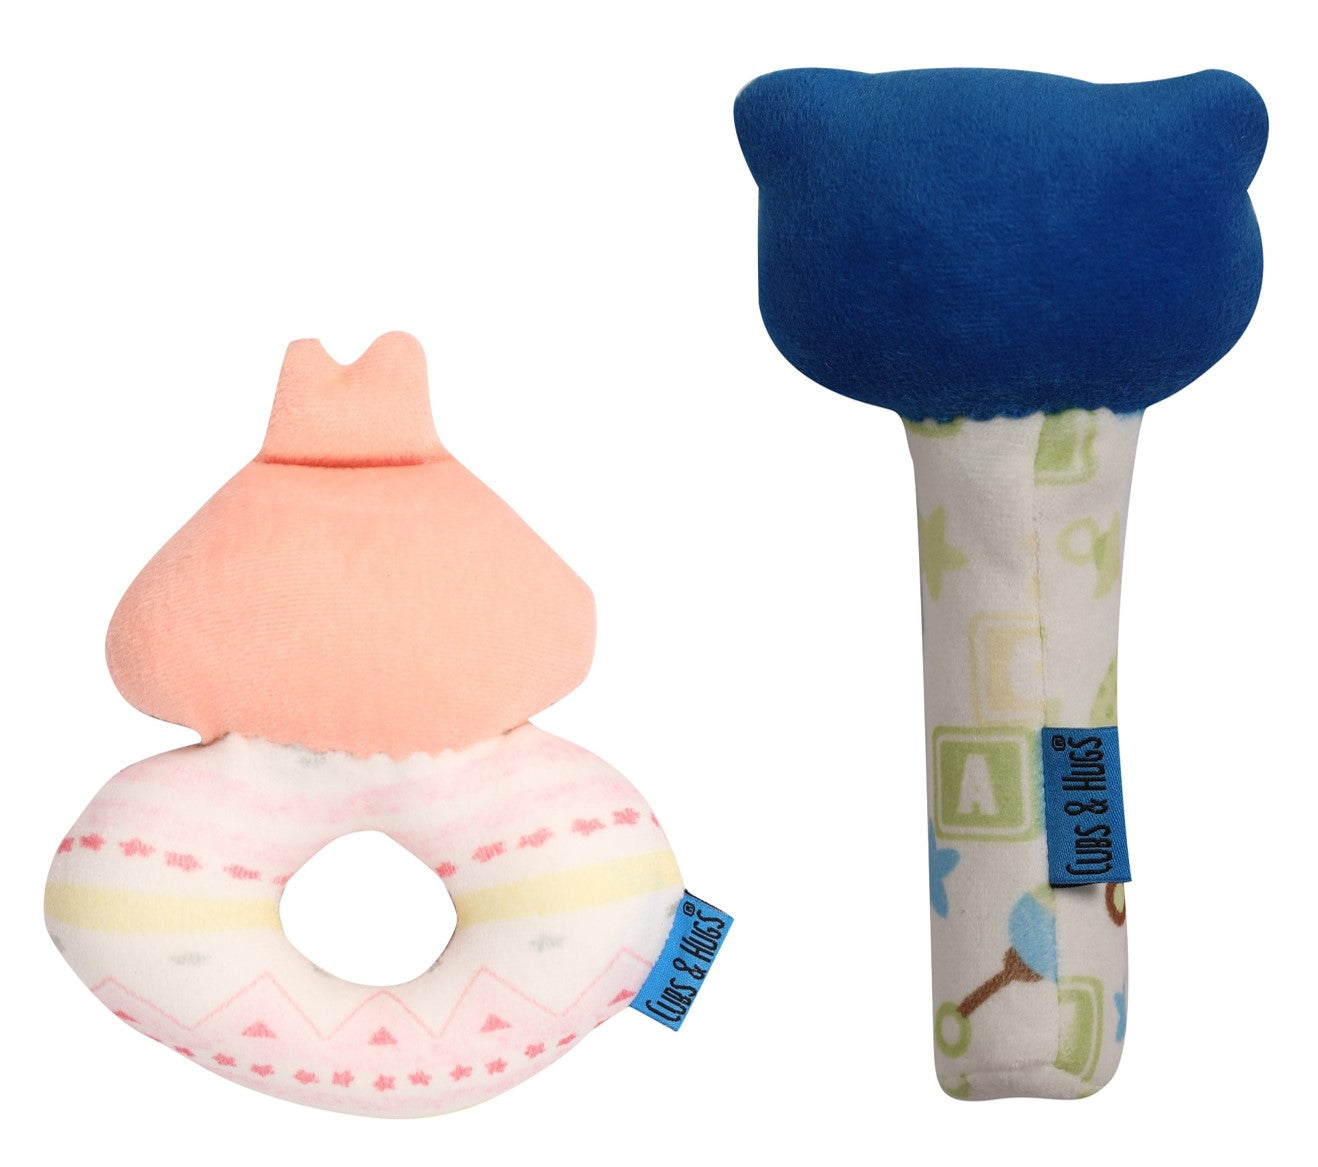 Soft Toys for Babies Face Rattle Girls Toys & Boys Toys (Squeeze Handle for Squeaky Sound)